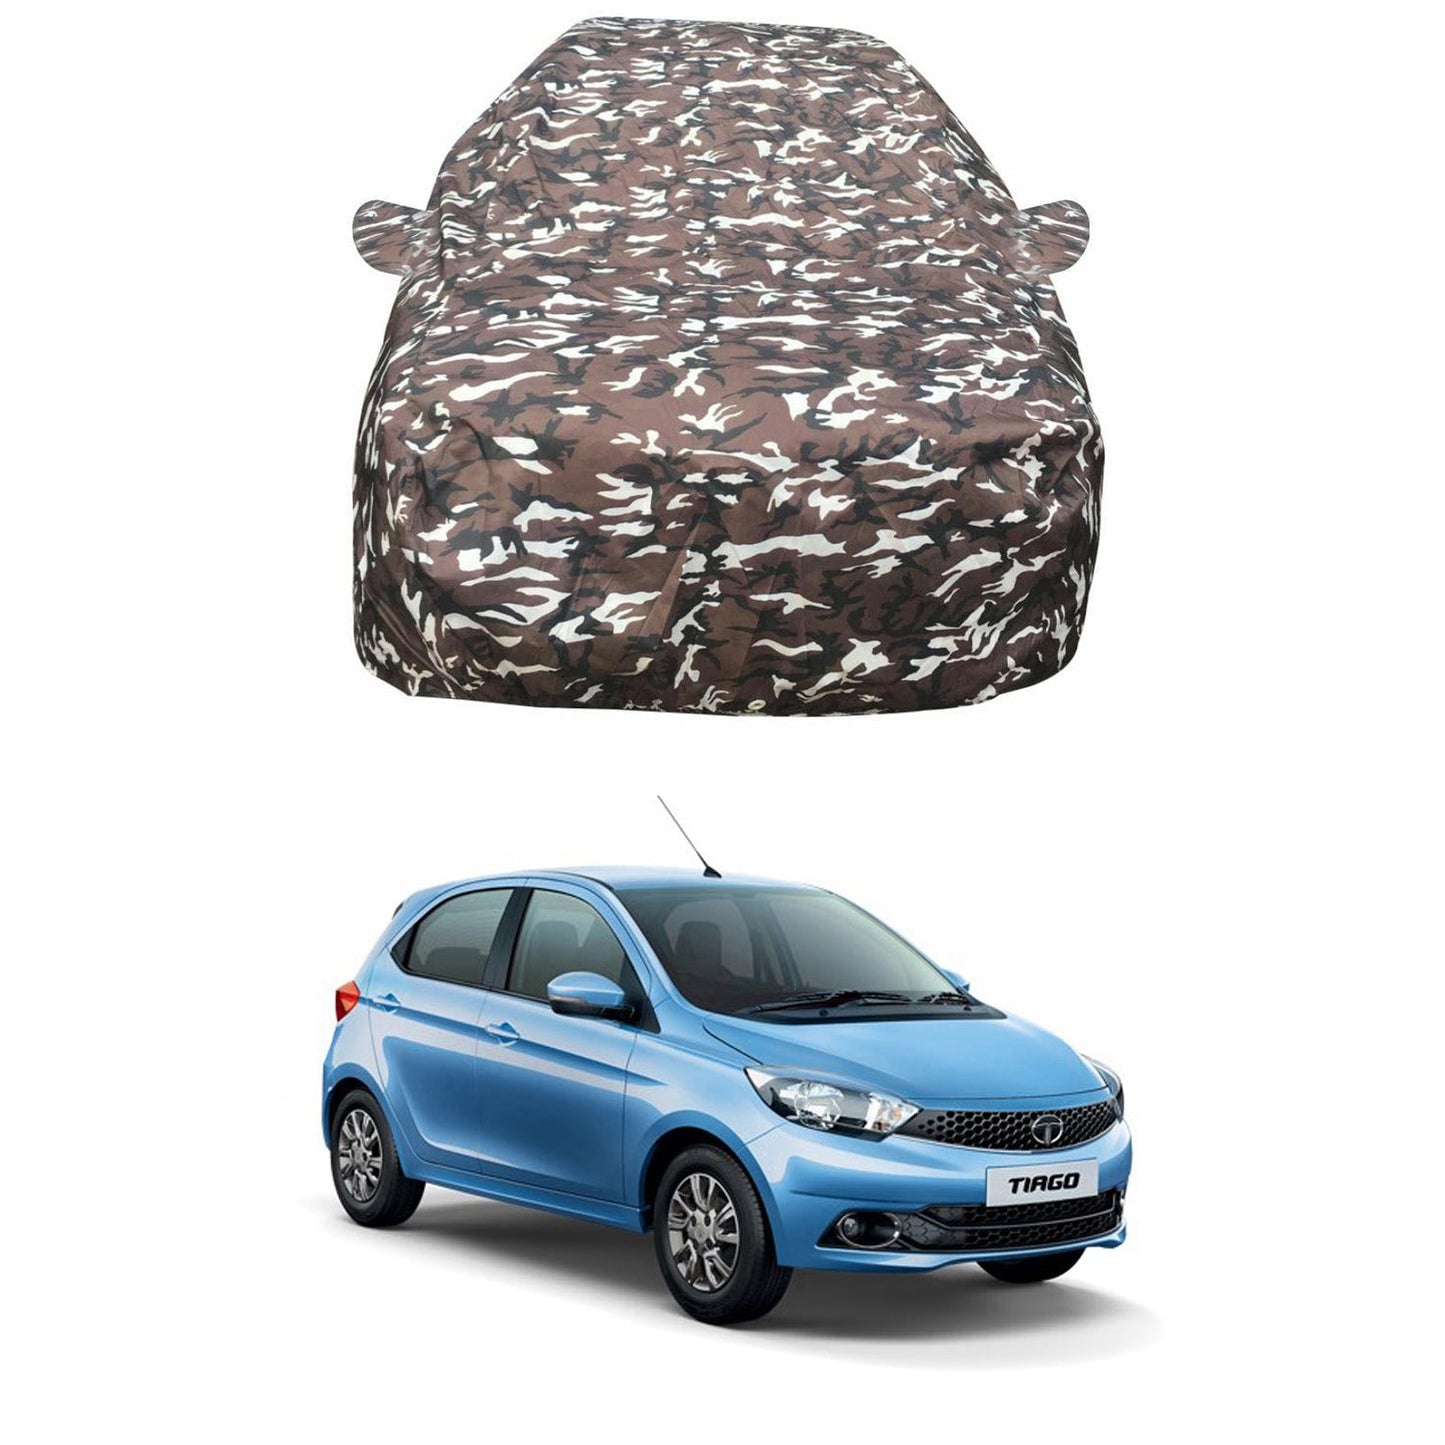 Oshotto Ranger Design Made of 100% Waterproof Fabric Car Body Cover with Mirror Pockets For Tata Tiago